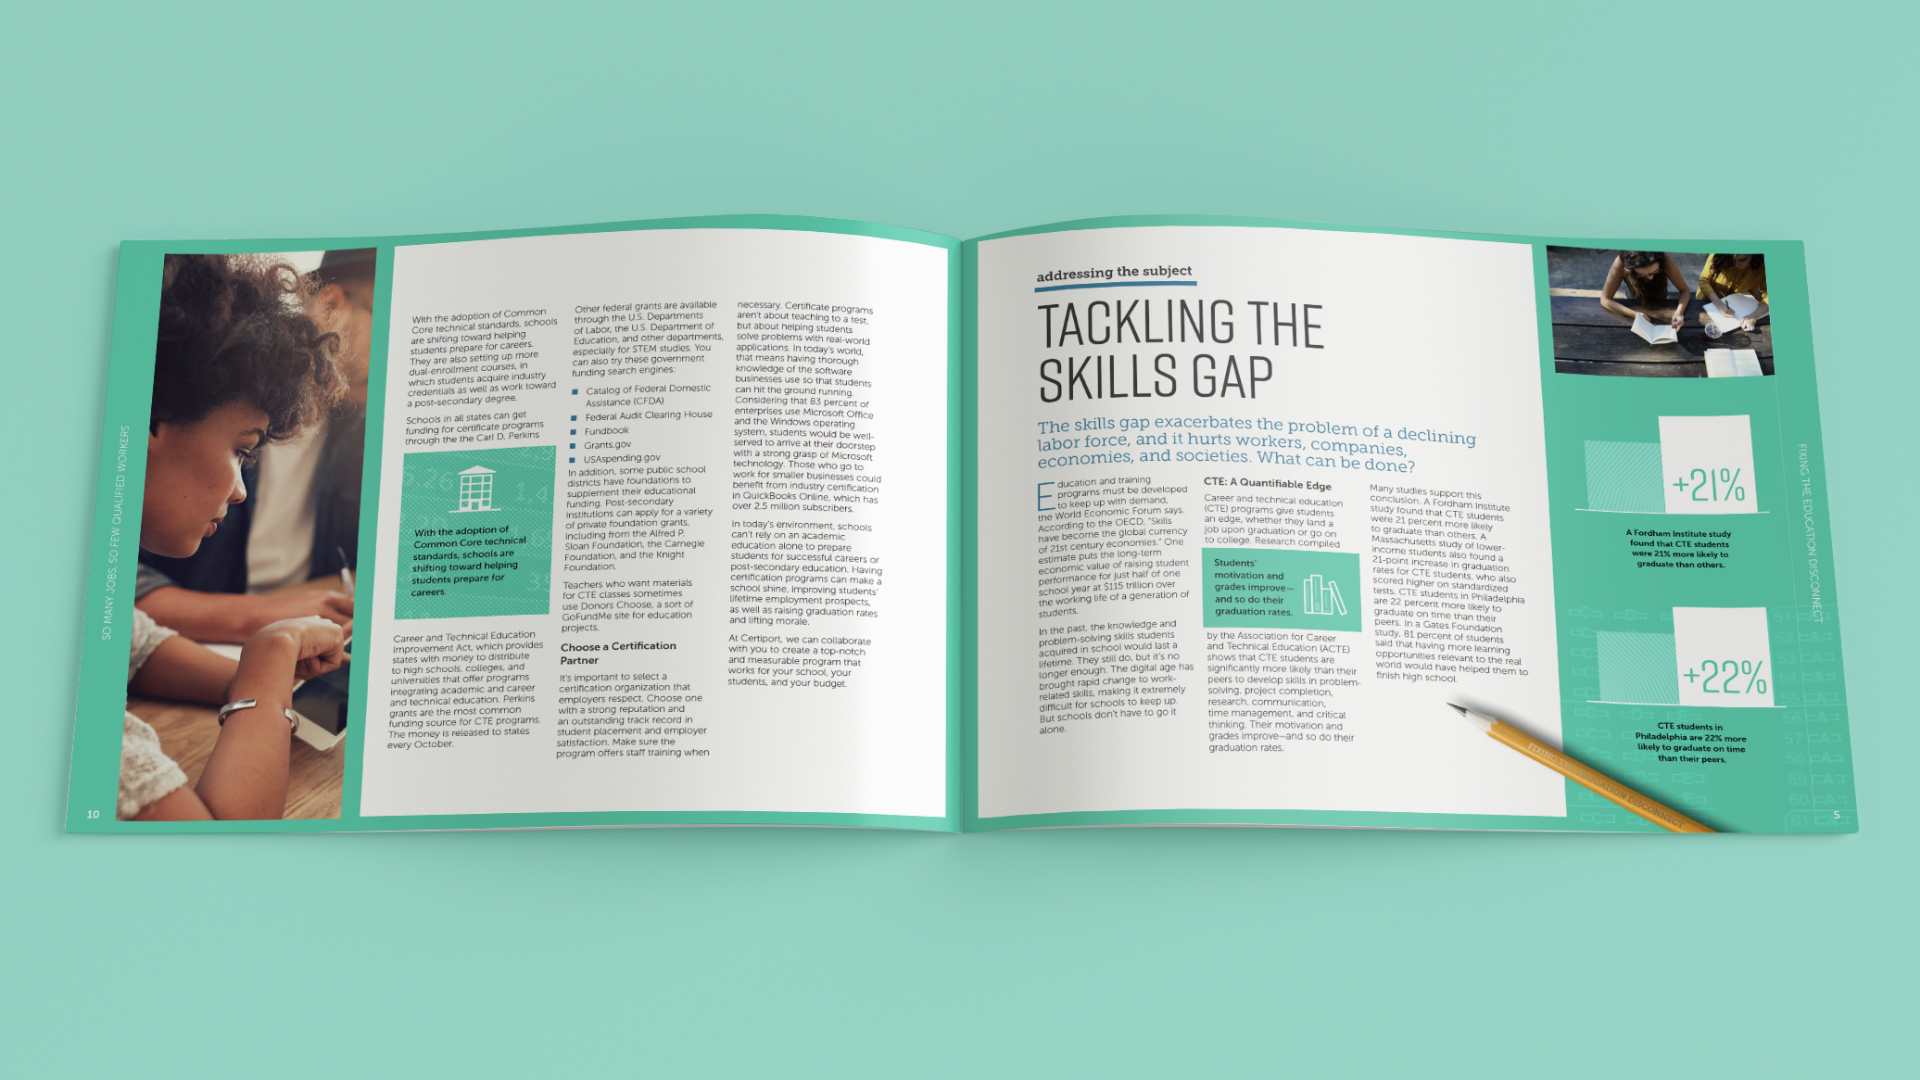 Ebook opened to see full spread design of the tackling the skill gap content page with pull quotes and highlighted statistics